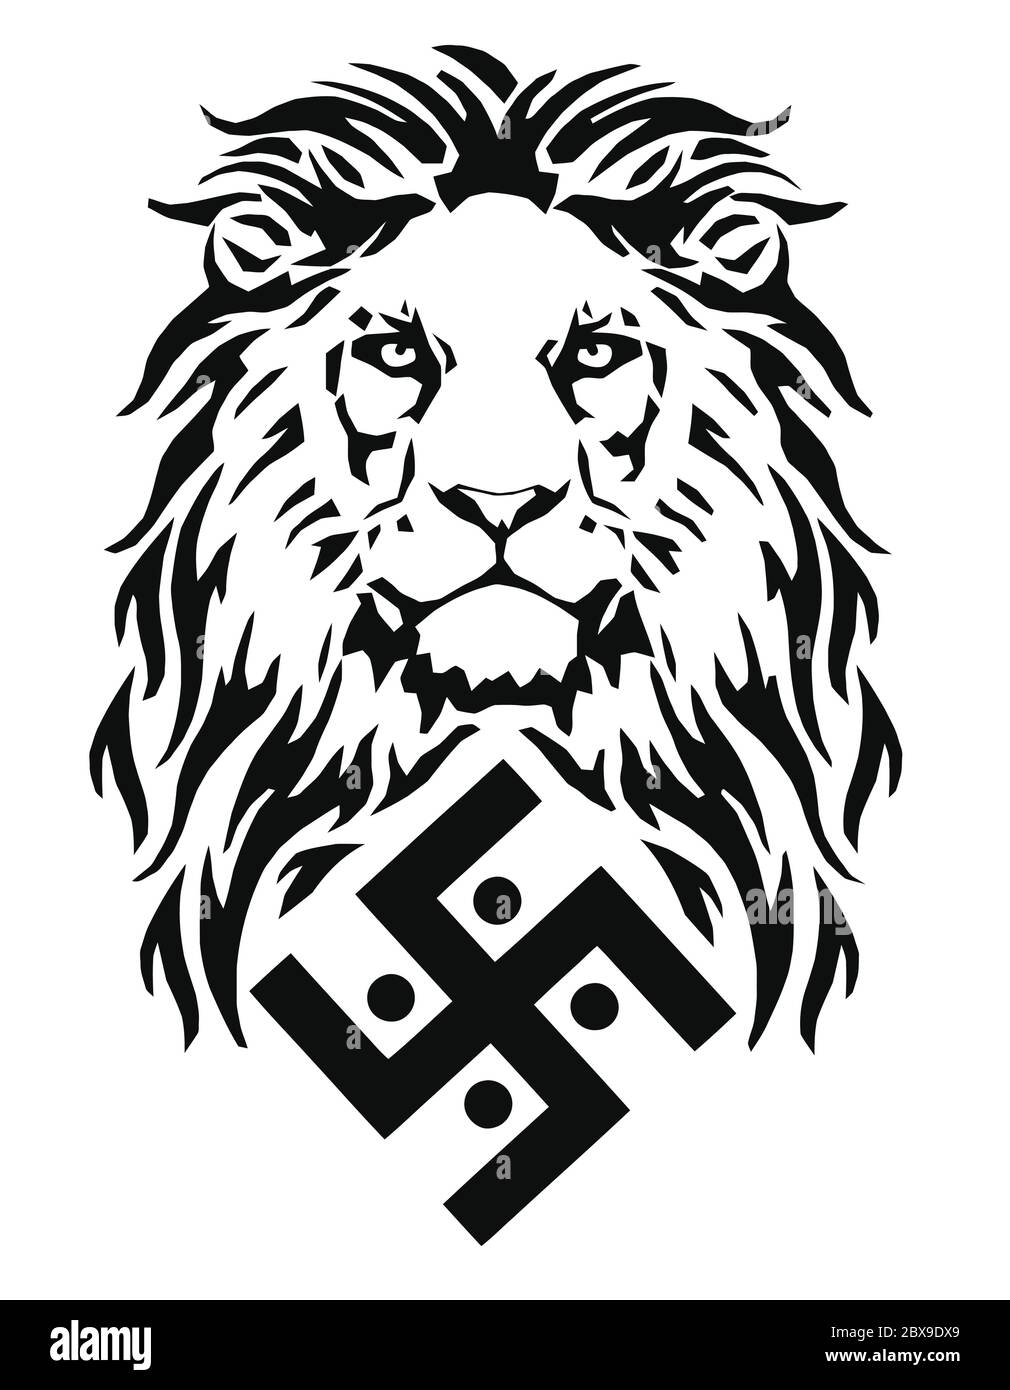 The lion and the symbol of the Indian religion of Jainism - the swastika, drawing for tattoos, on a white background, vector Stock Vector